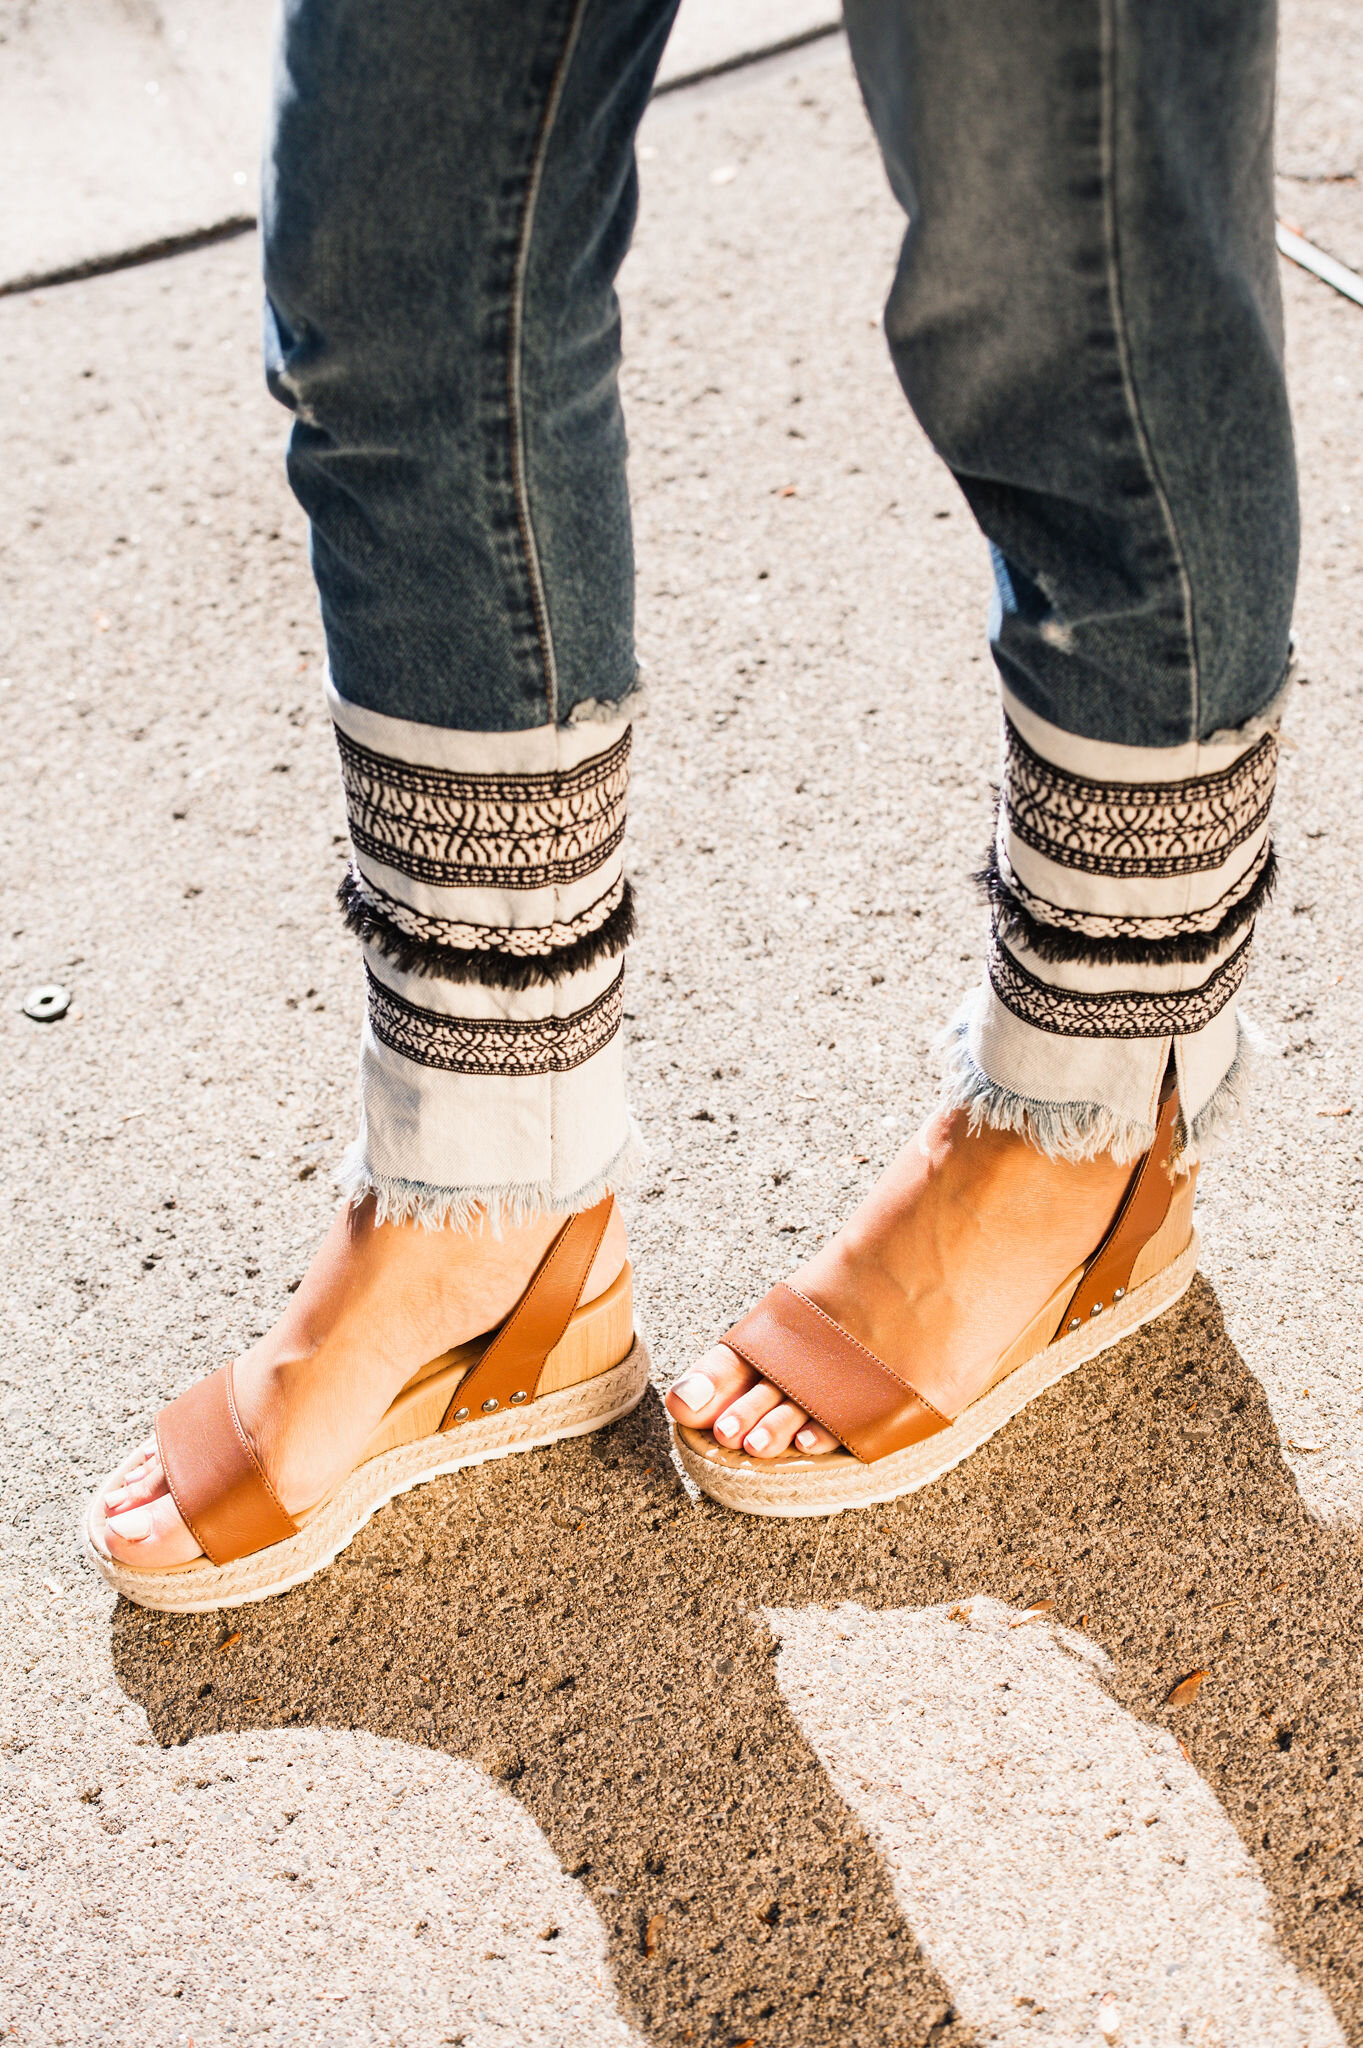 How to Wear Sandals with Jeans